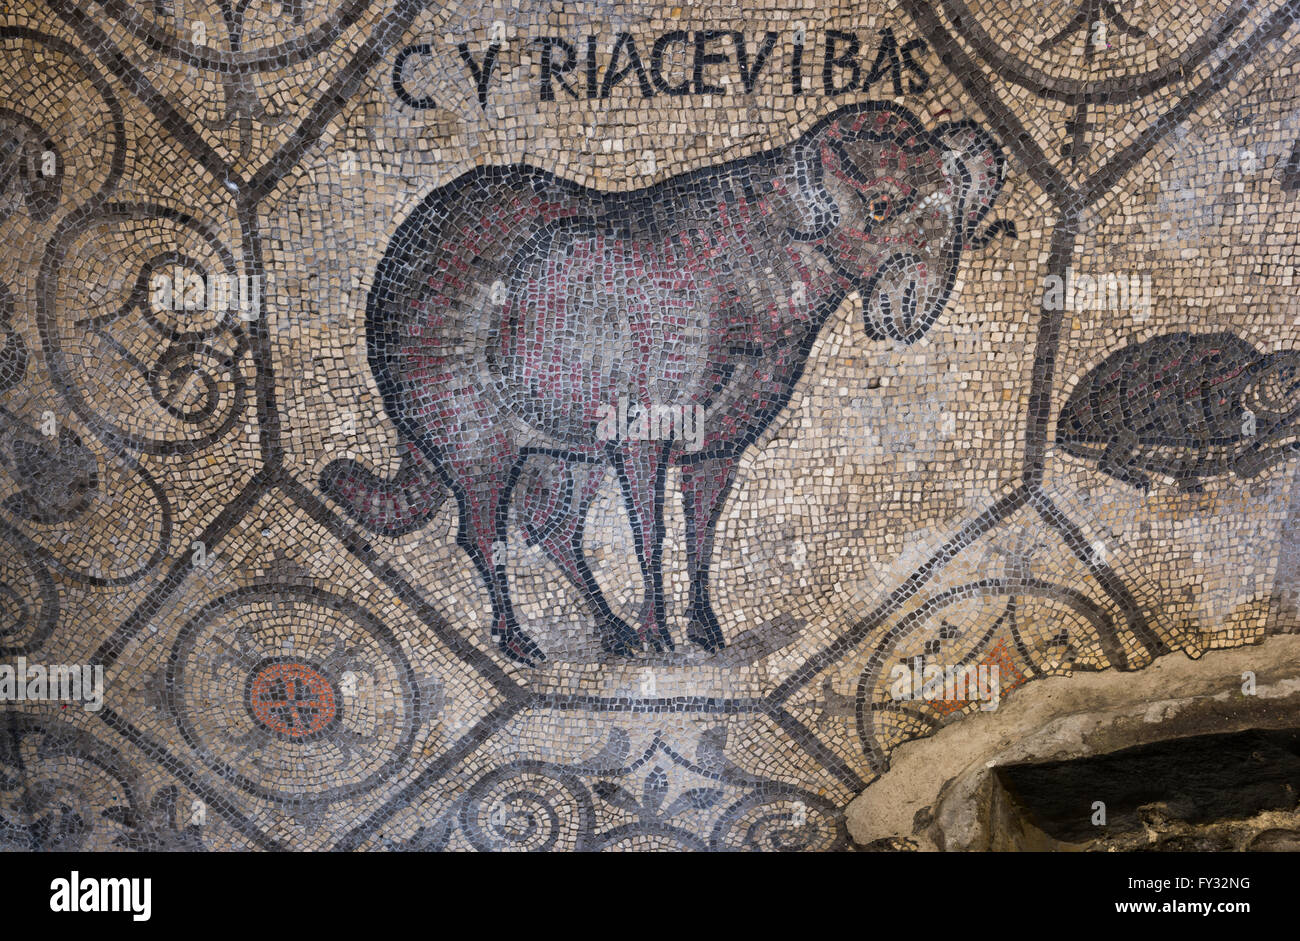 Early Christian mosaic floor with animal symbolism, 4th century, exposed in Romanesque Basilica, Aquileia, Udine province Stock Photo